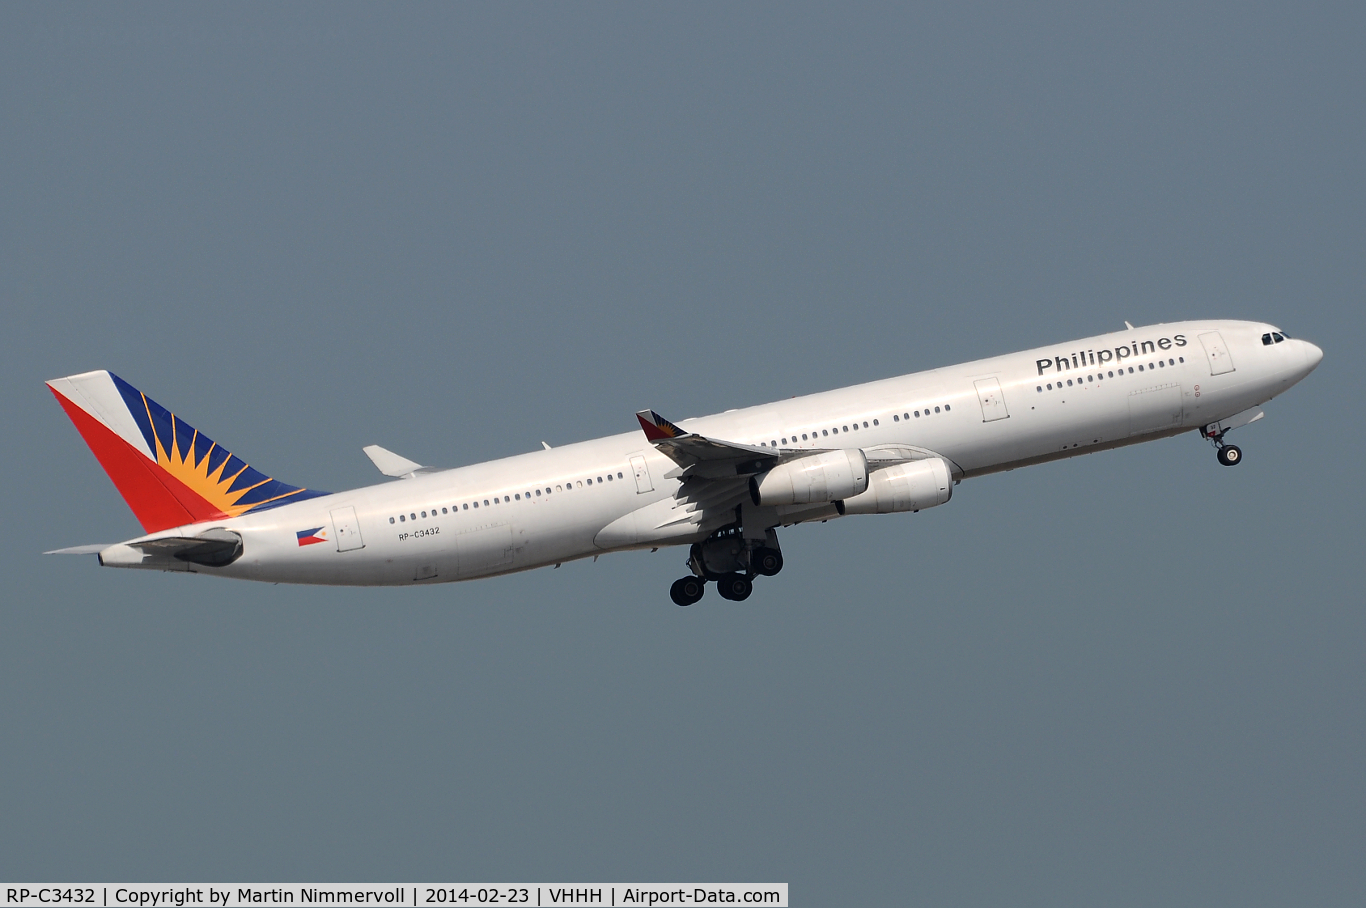 RP-C3432, 1997 Airbus A340-313X C/N 187, Philippine Airlines